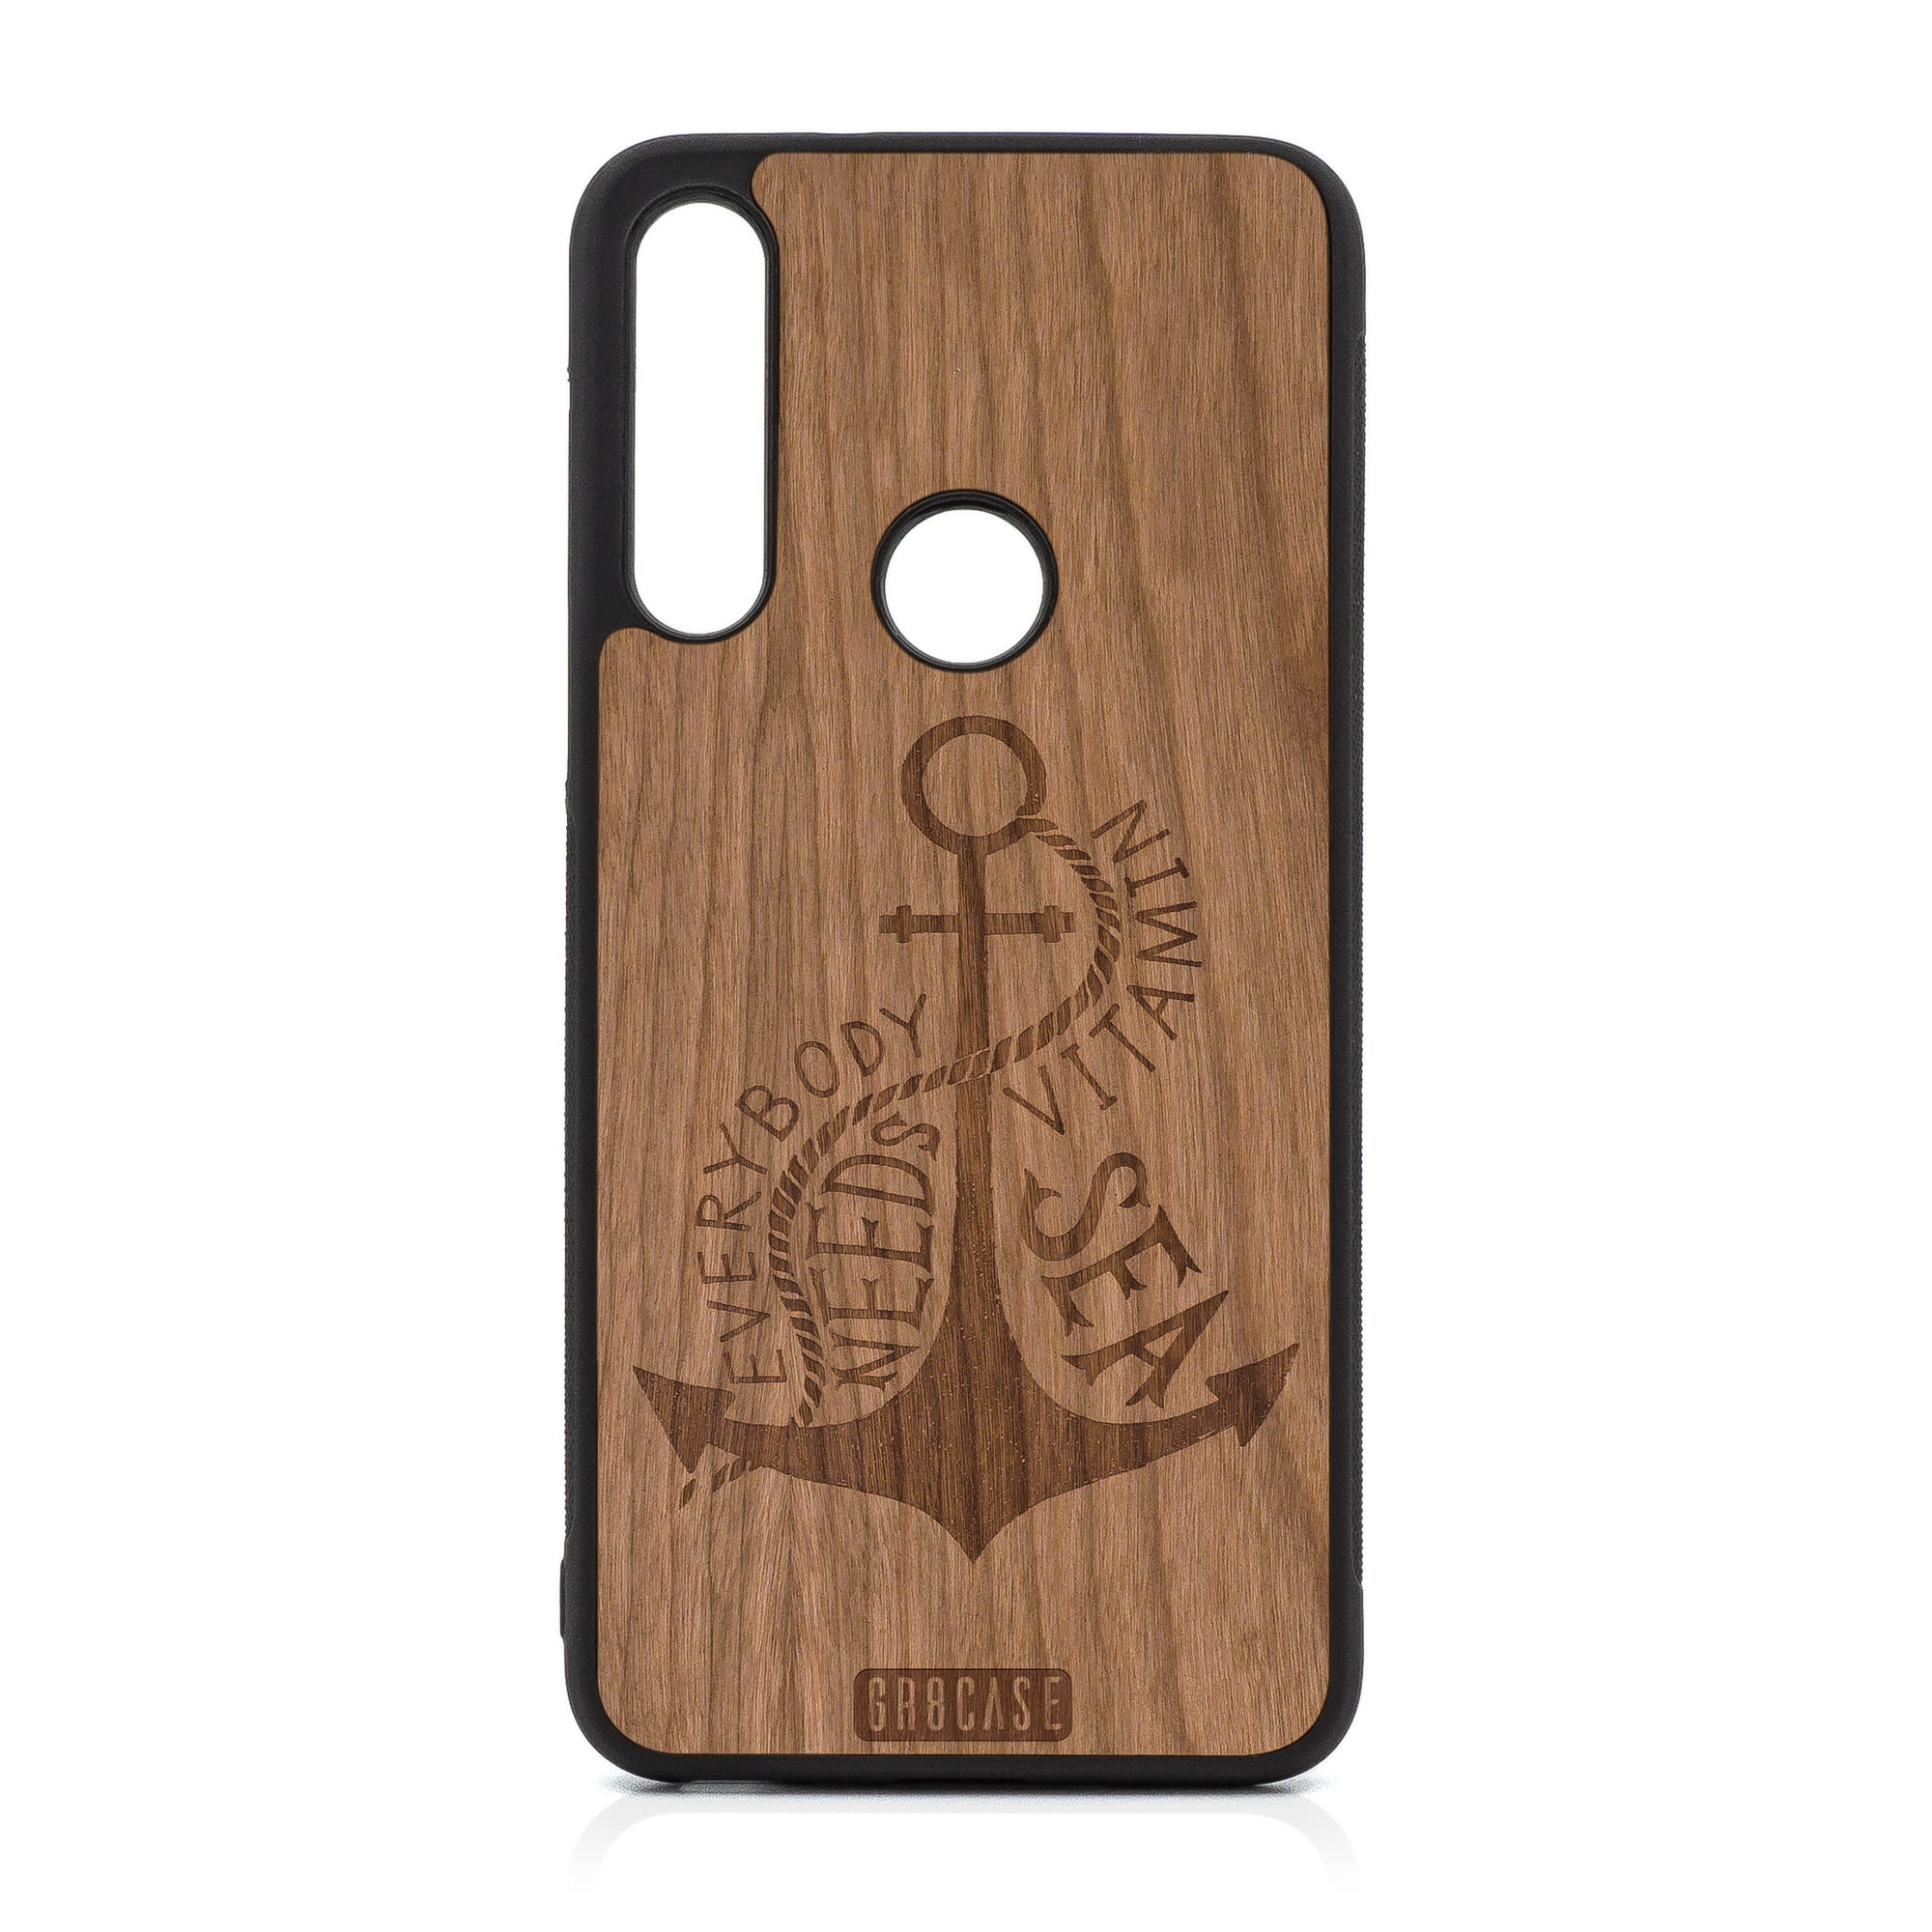 Everybody Needs Vitamin Sea (Anchor) Design Wood Case For Moto G Fast